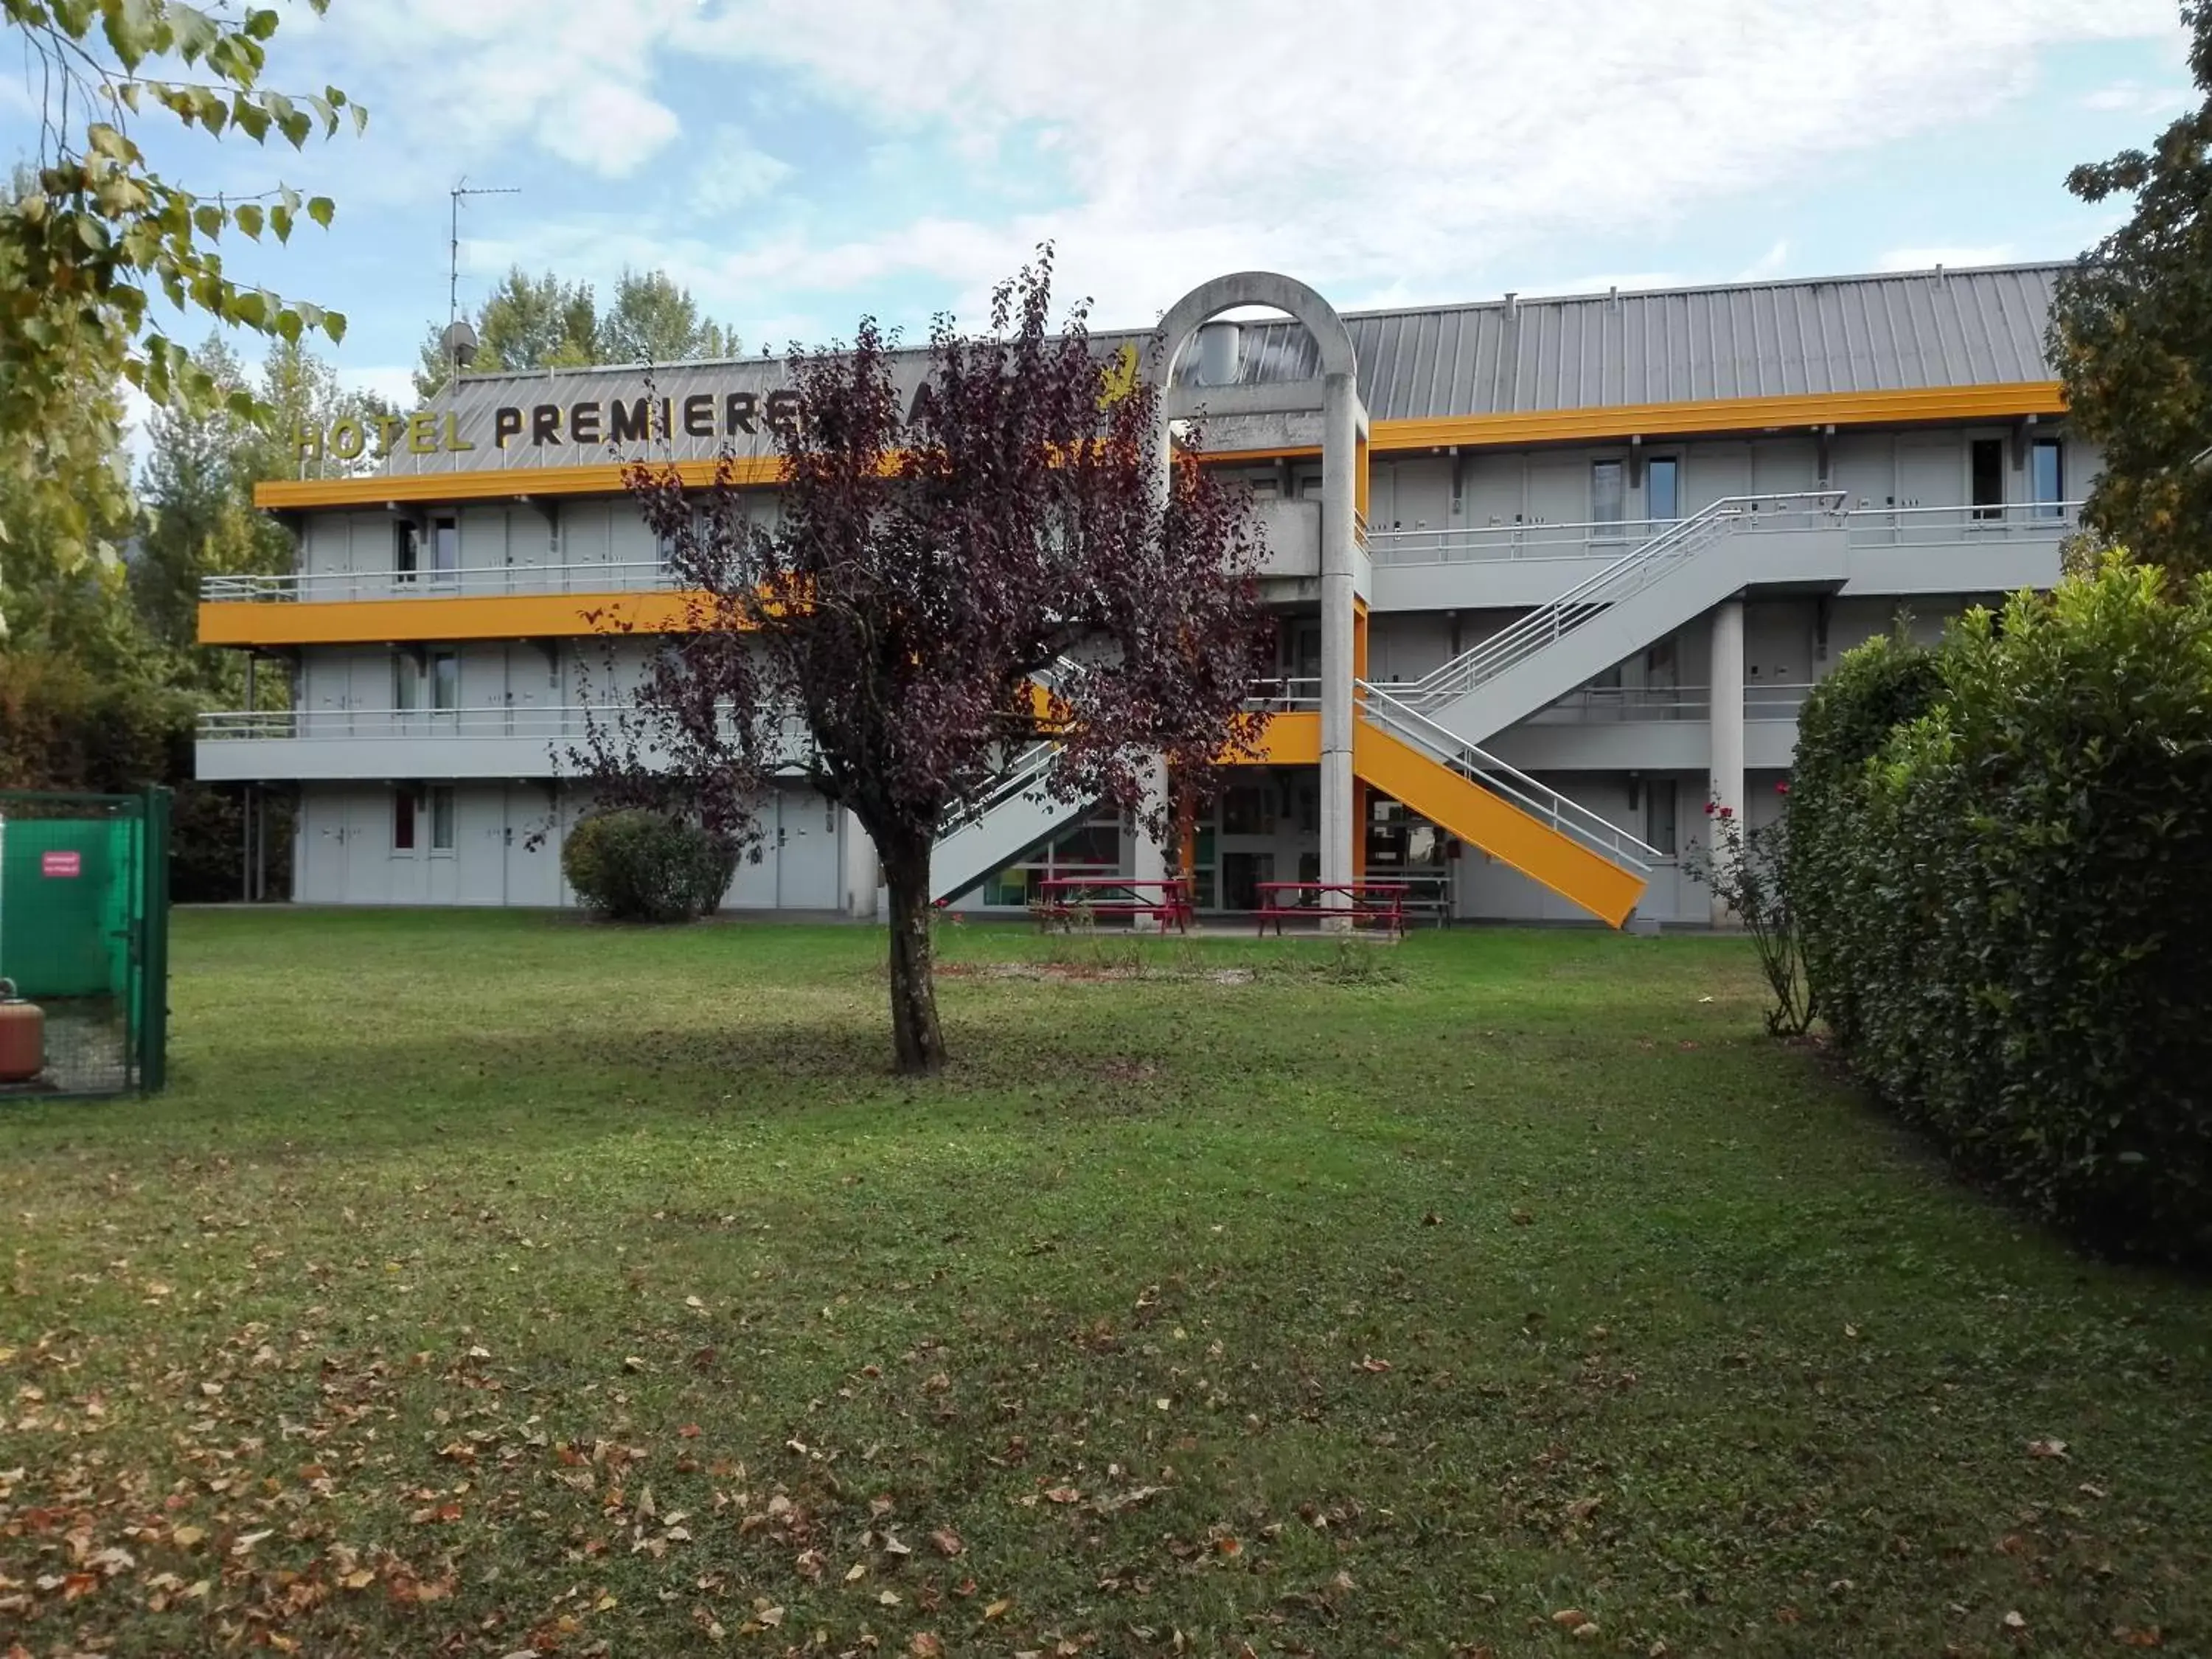 Property Building in Premiere Classe Grenoble Sud - Gieres Universite